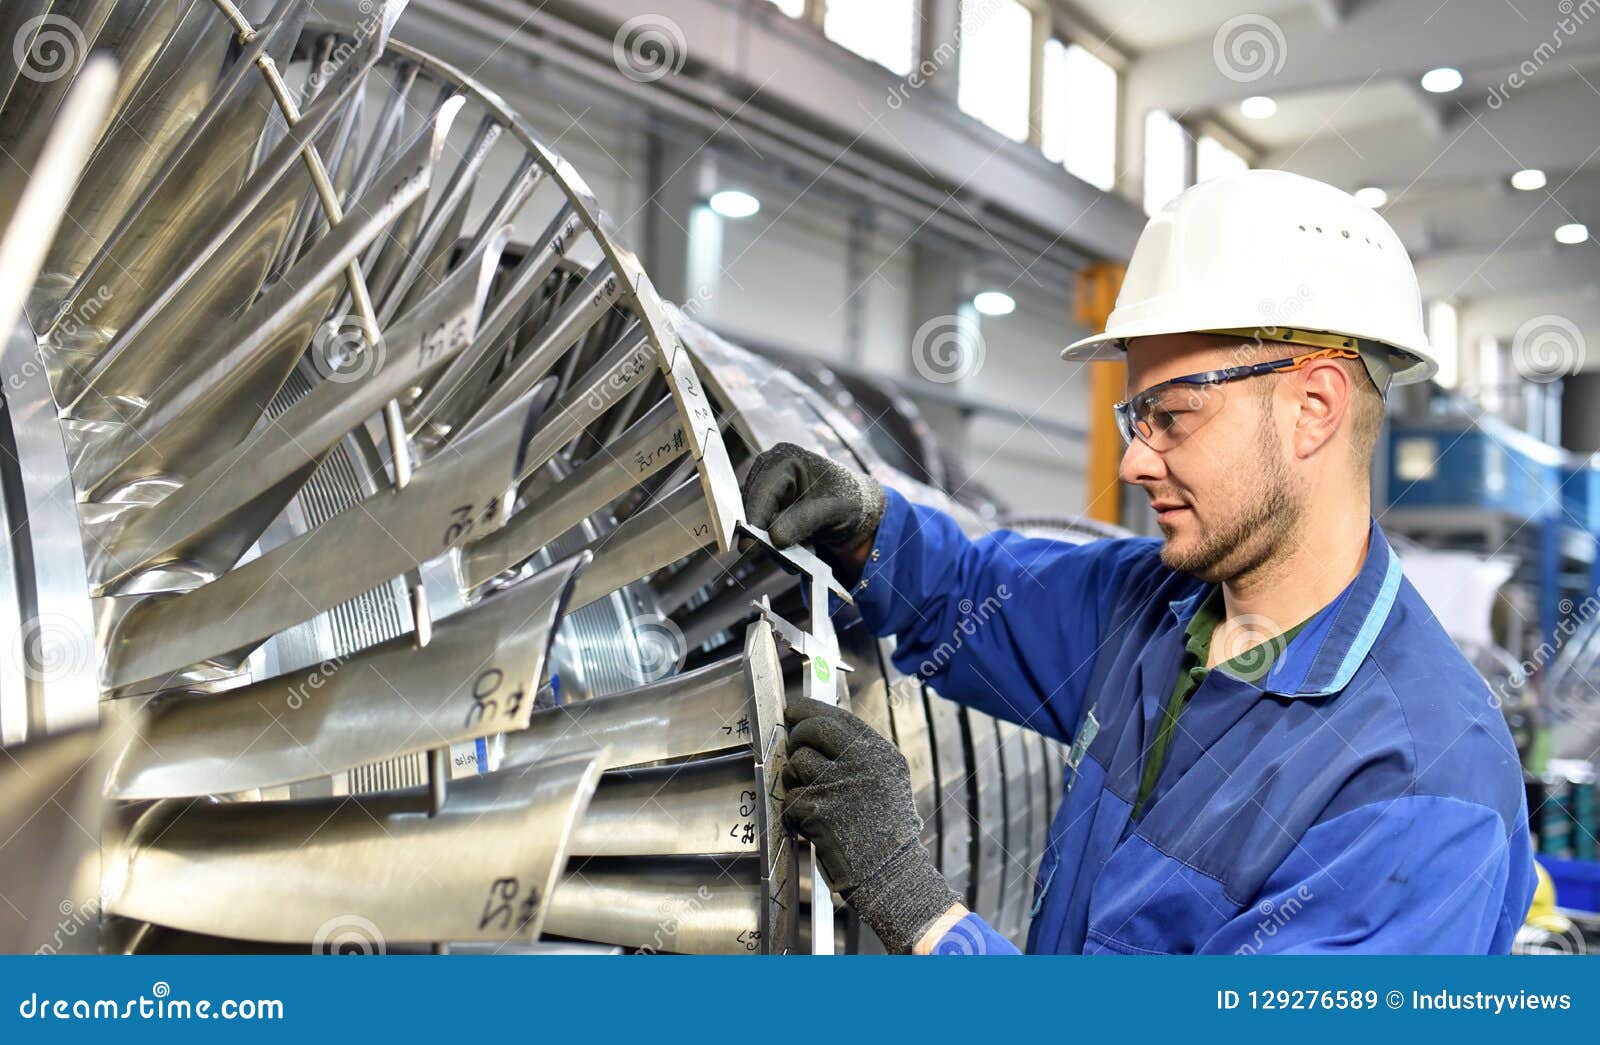 workers manufacturing steam turbines in an industrial factory